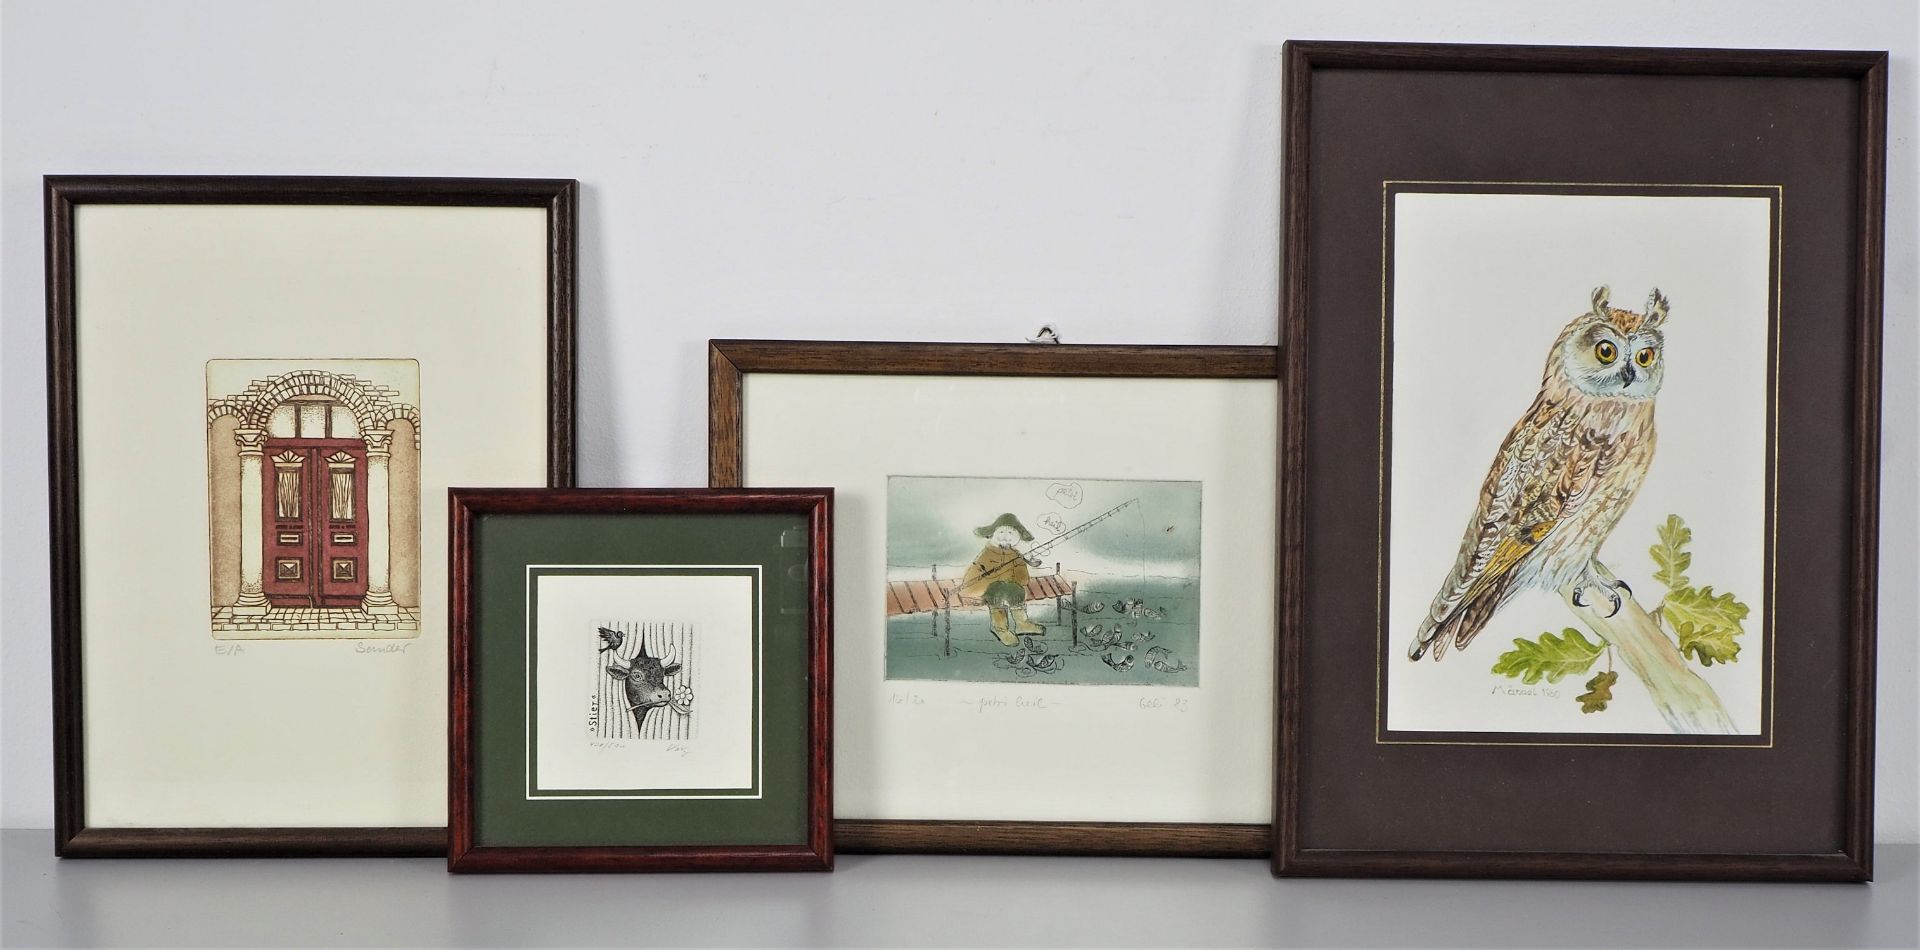 Convolute engravings and watercolor in frame, 4 pieces.